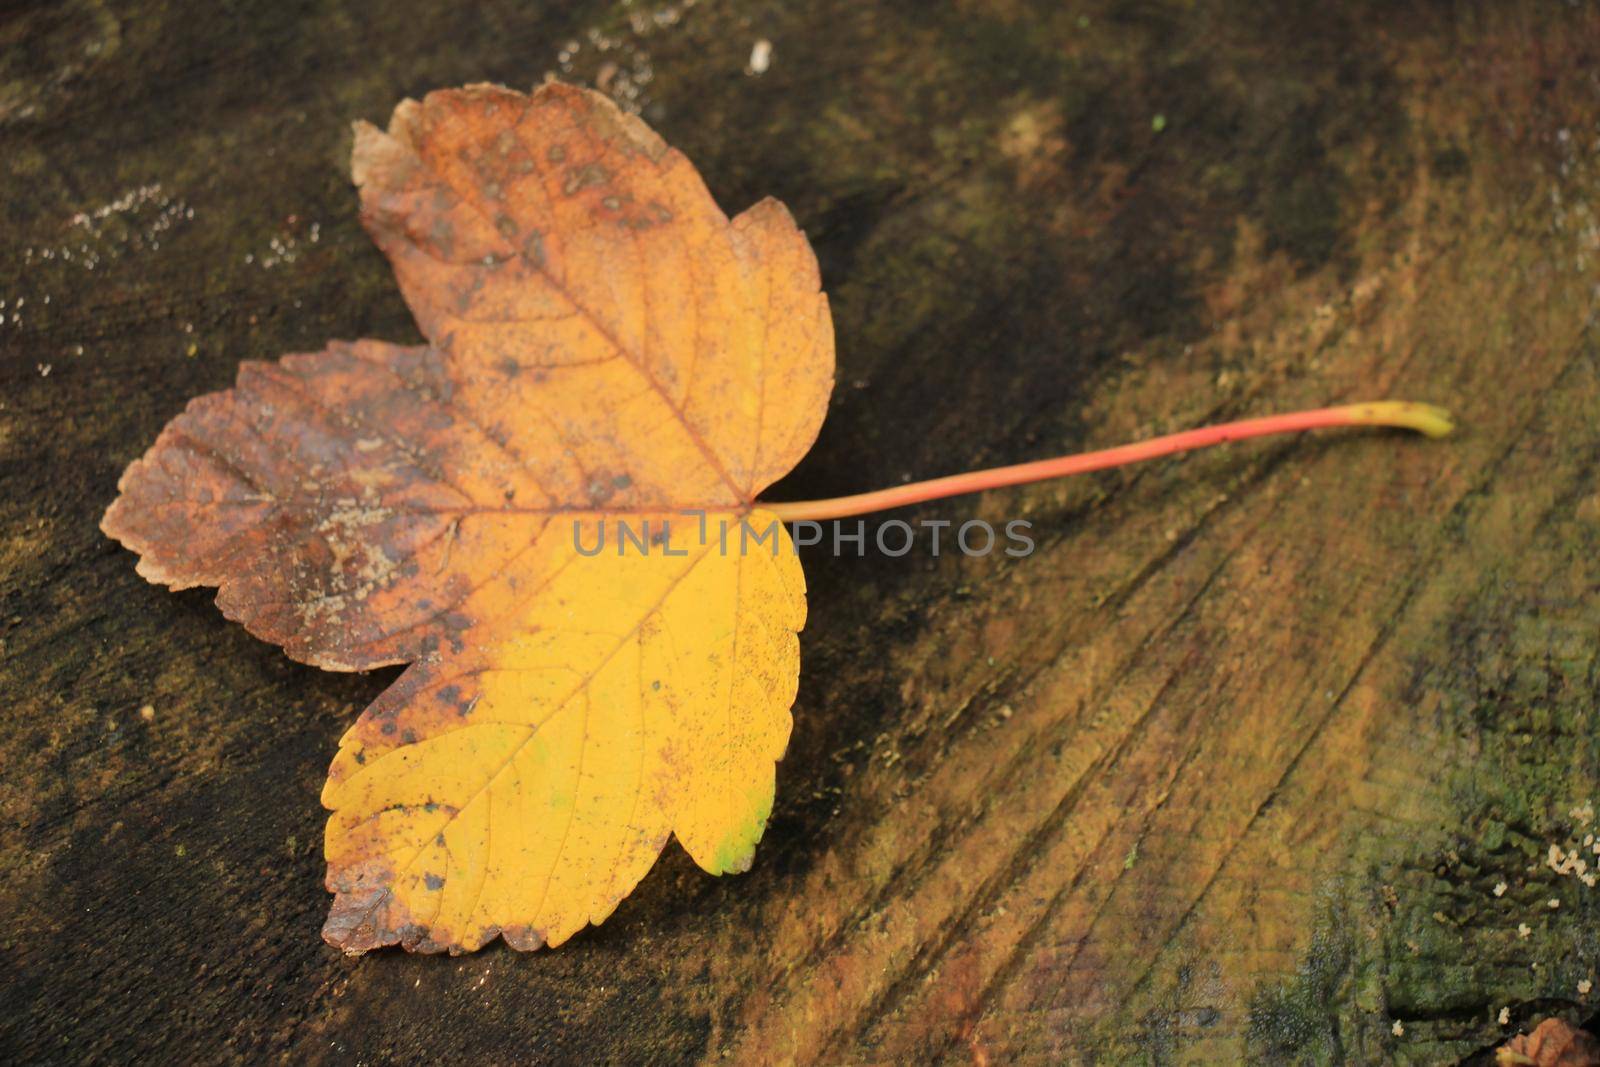 yellow maple leaf on wet wood in an autumn forest